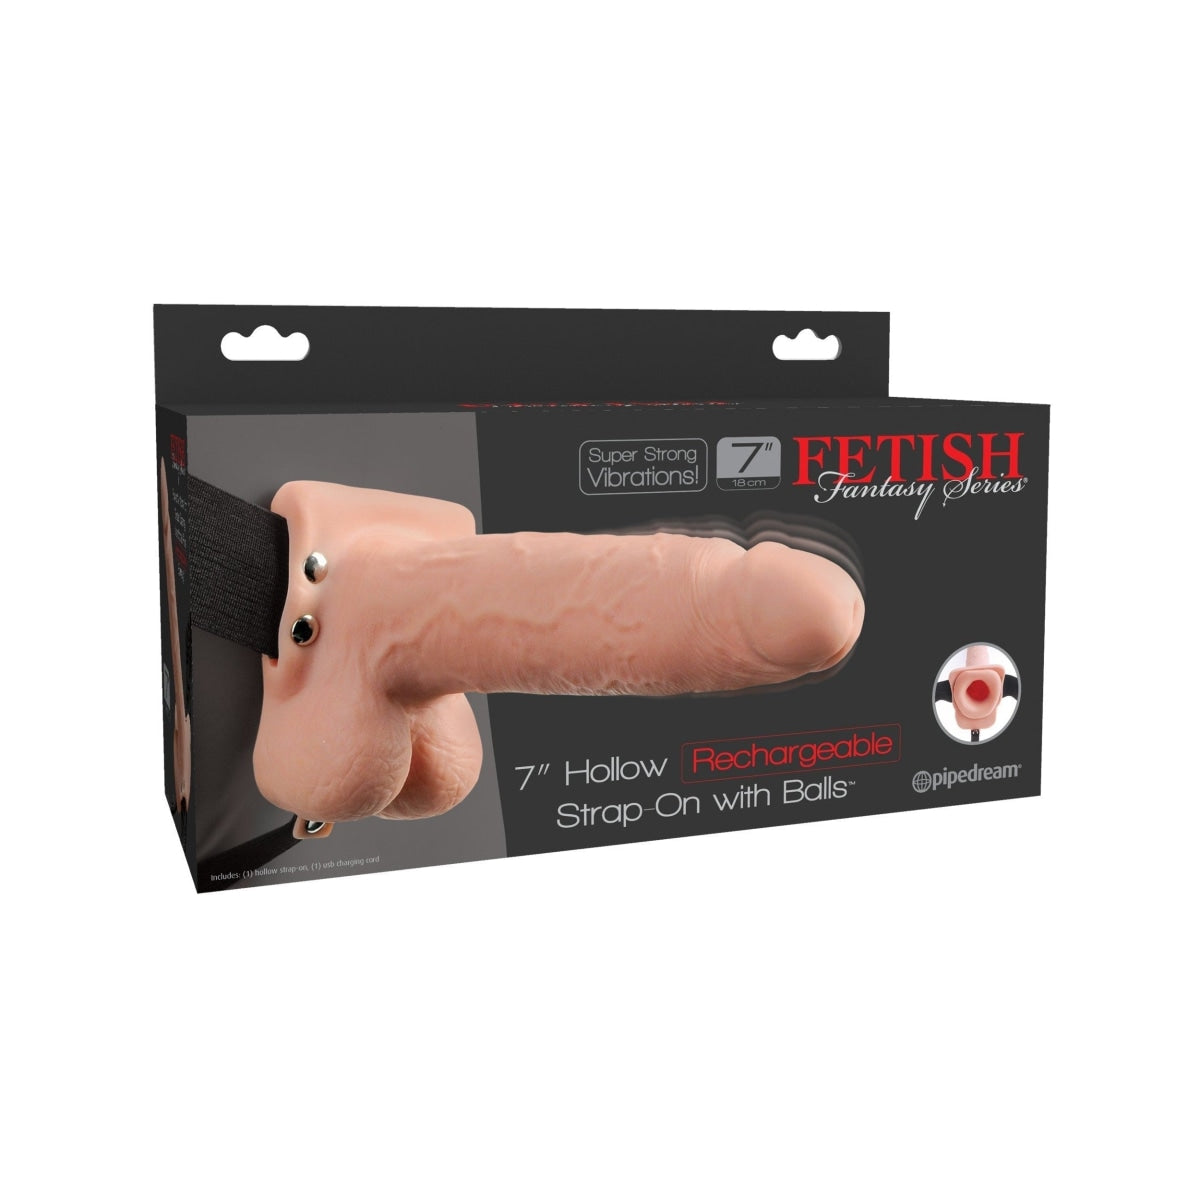 Fetish Fantasy 7 In Hollow Rechargeable Strap-on W- Balls Intimates Adult Boutique